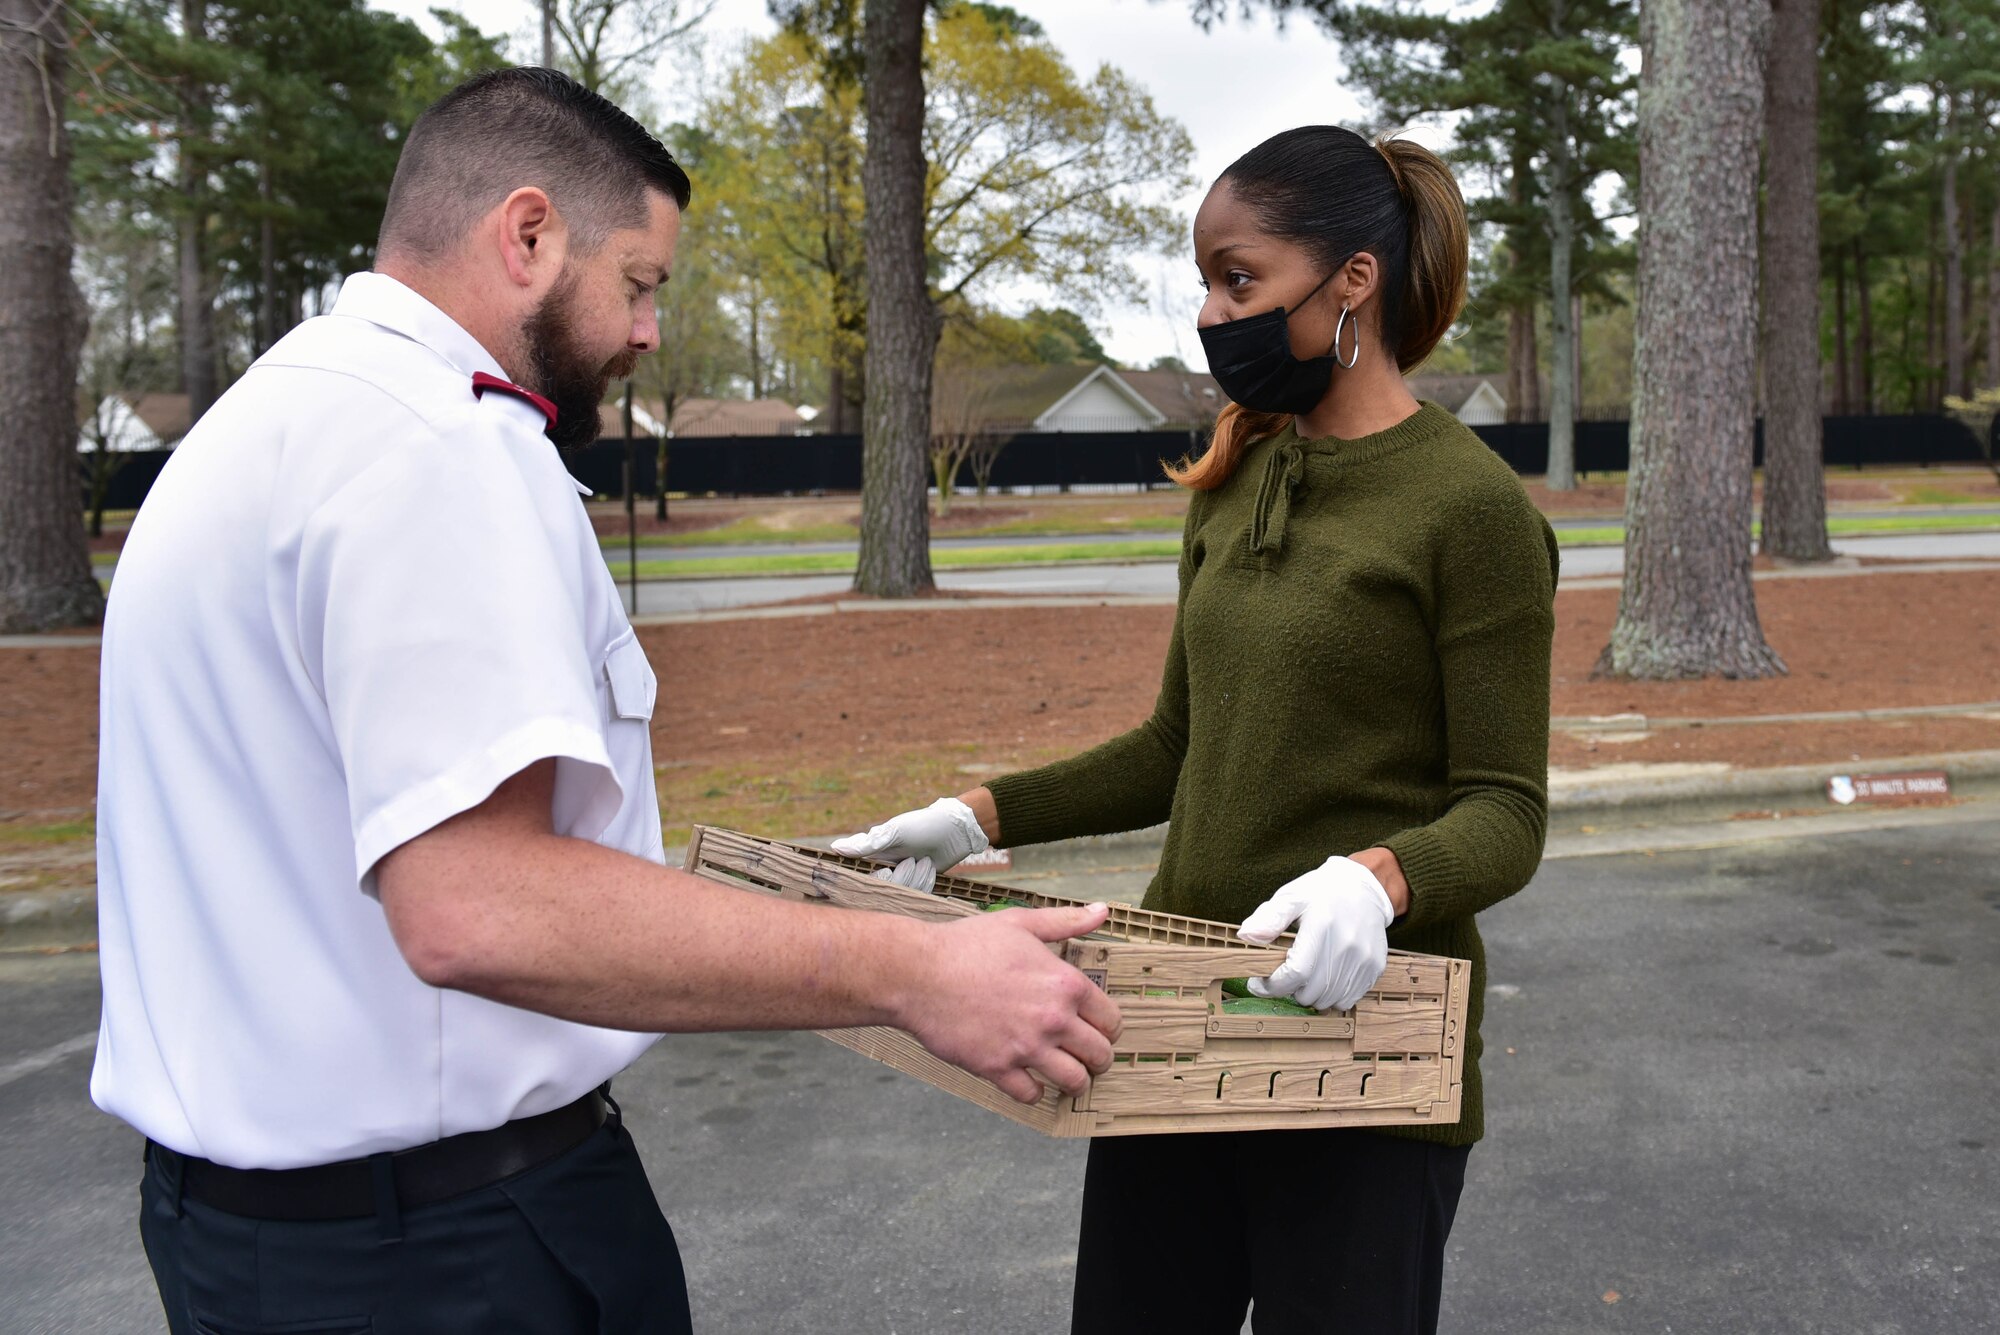 Captain Phillip Stokes, Salvation Army of Goldsboro corps officer, left, accepts donated produce from Melanie Simon at Seymour Johnson Air Force Base, N.C. on March 22, 2020.